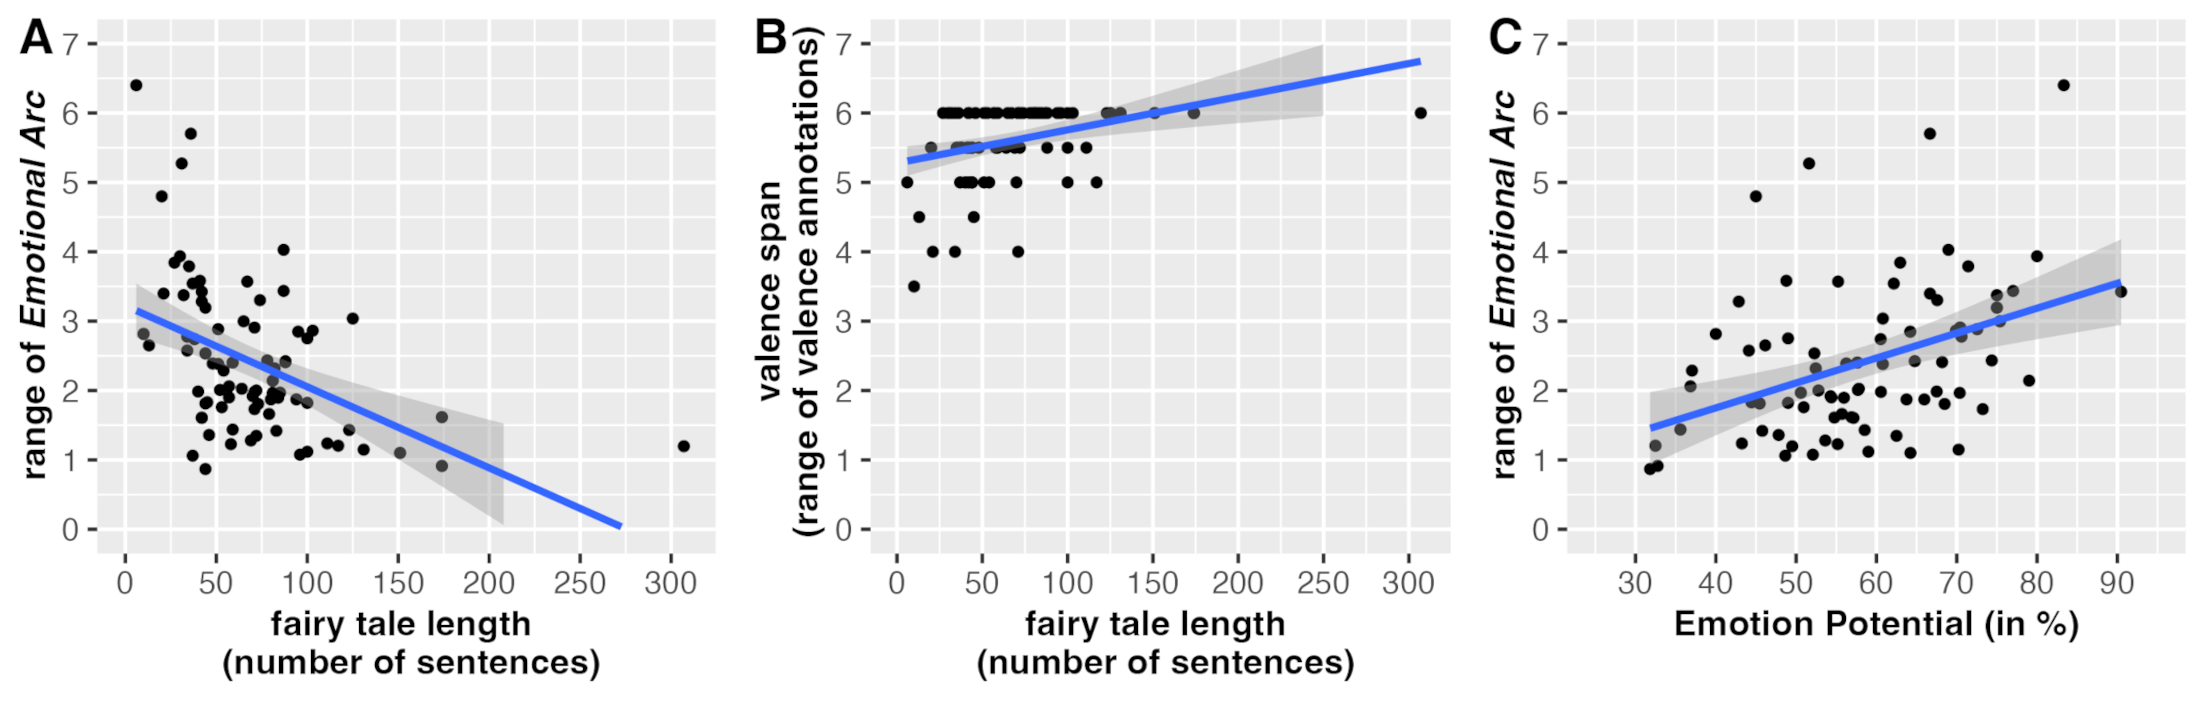 
                              Fig. 4: Relationship between
                              fairy tale length and range of DCT smoothed valence annotations (A),
                              fairy tale length and range of the original valence annotations
                              (valence span) (B), and Emotion Potential (percent of positive and
                              negative sentences) and range of the DCT smoothed valence annotations
                              (C). [Graphic: Berenike Herrmann / Jana Lüdtke 2023] 
                           